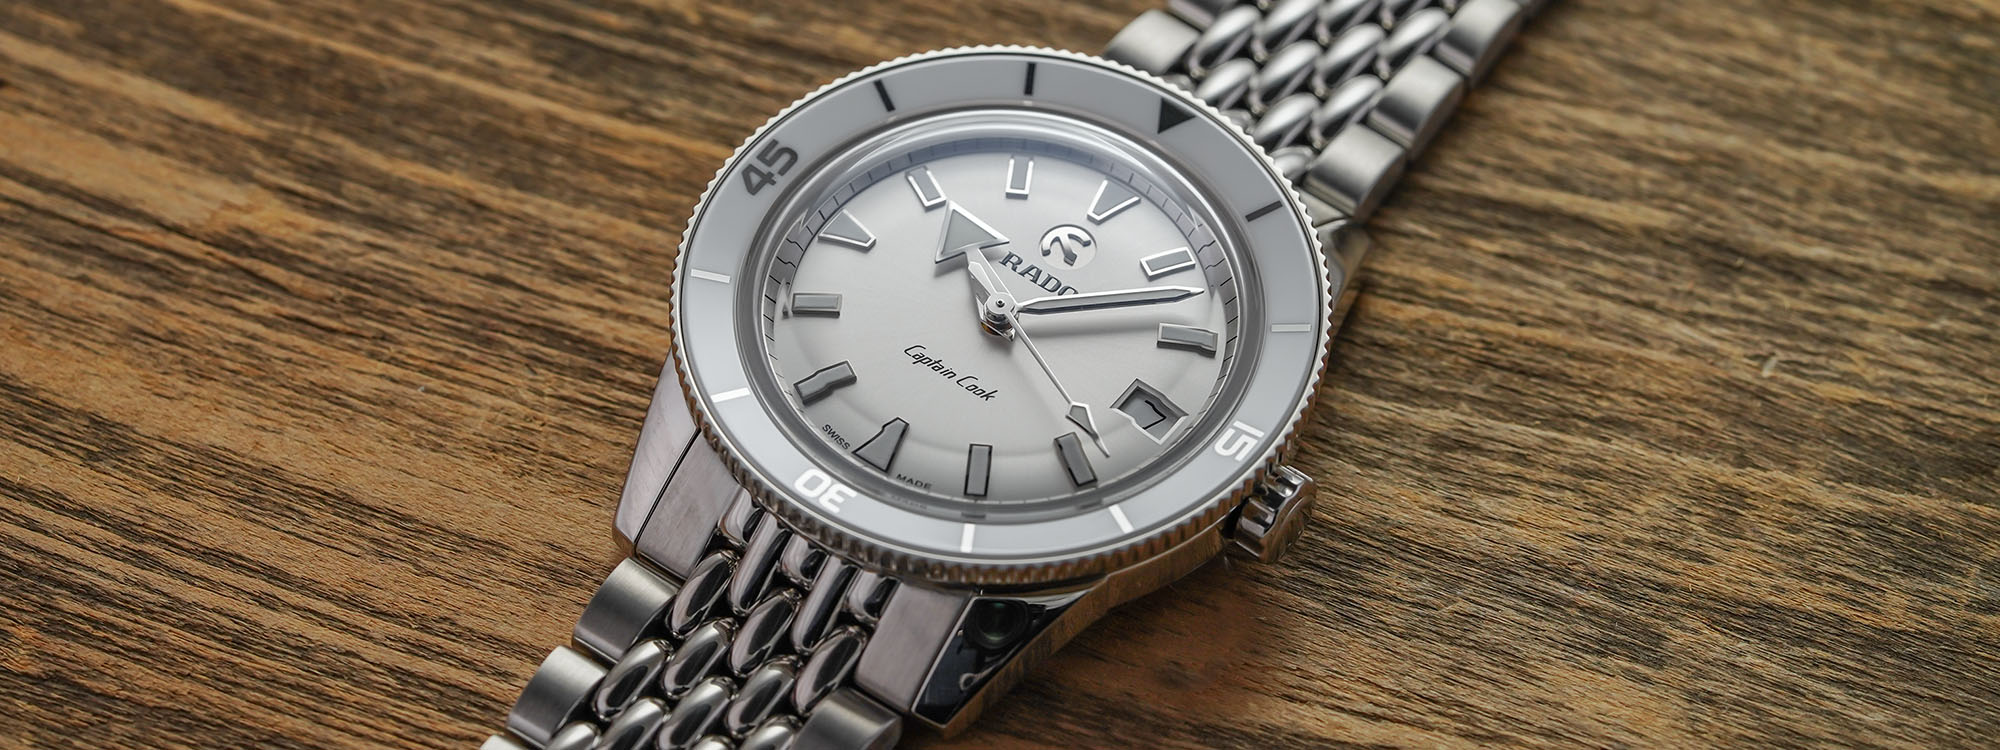 25 White-Dial Watches Suitable for Every Budget and Style